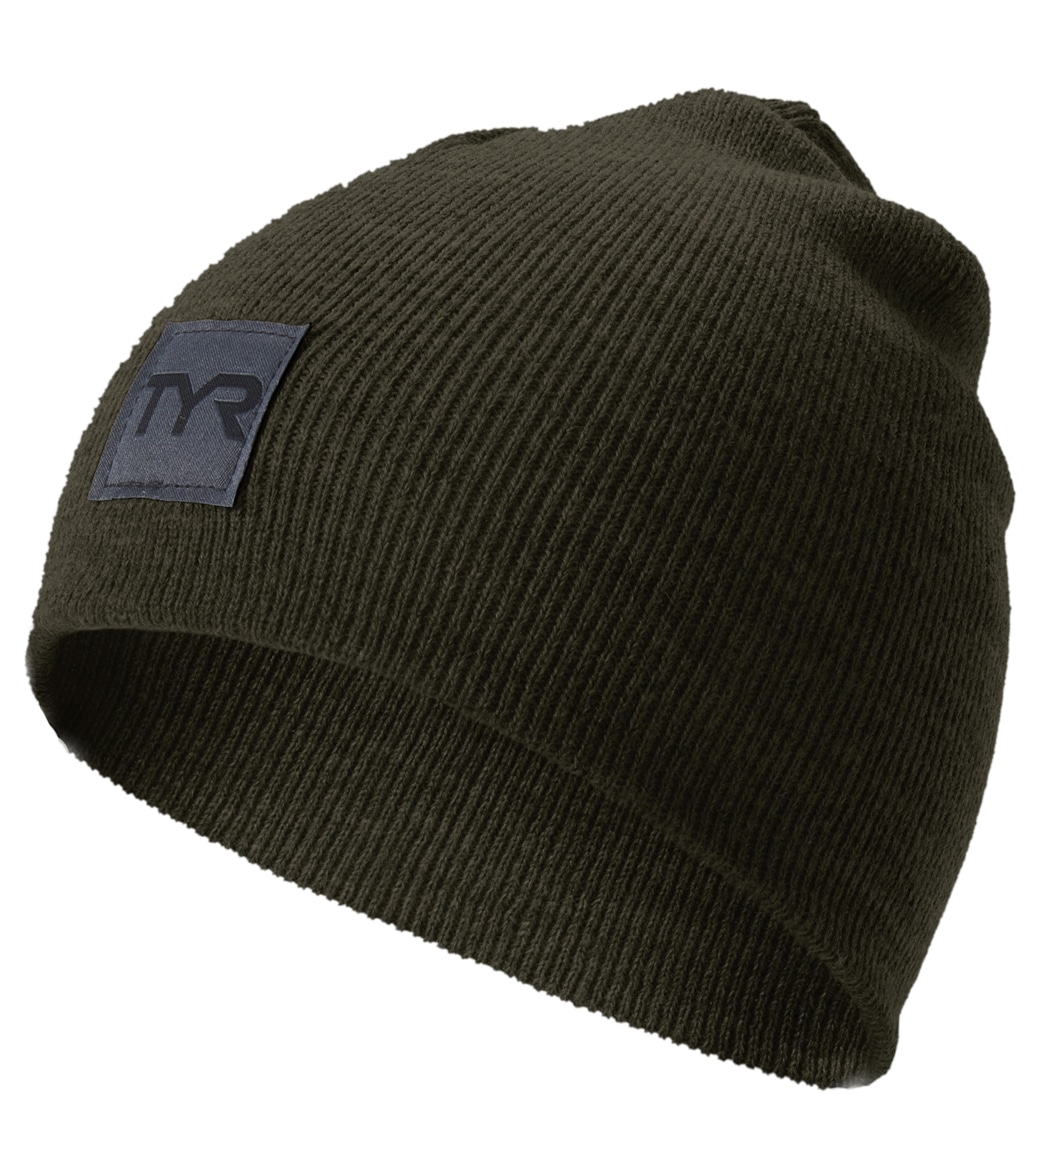 TYR Knit Beanie - Olive One Size - Swimoutlet.com